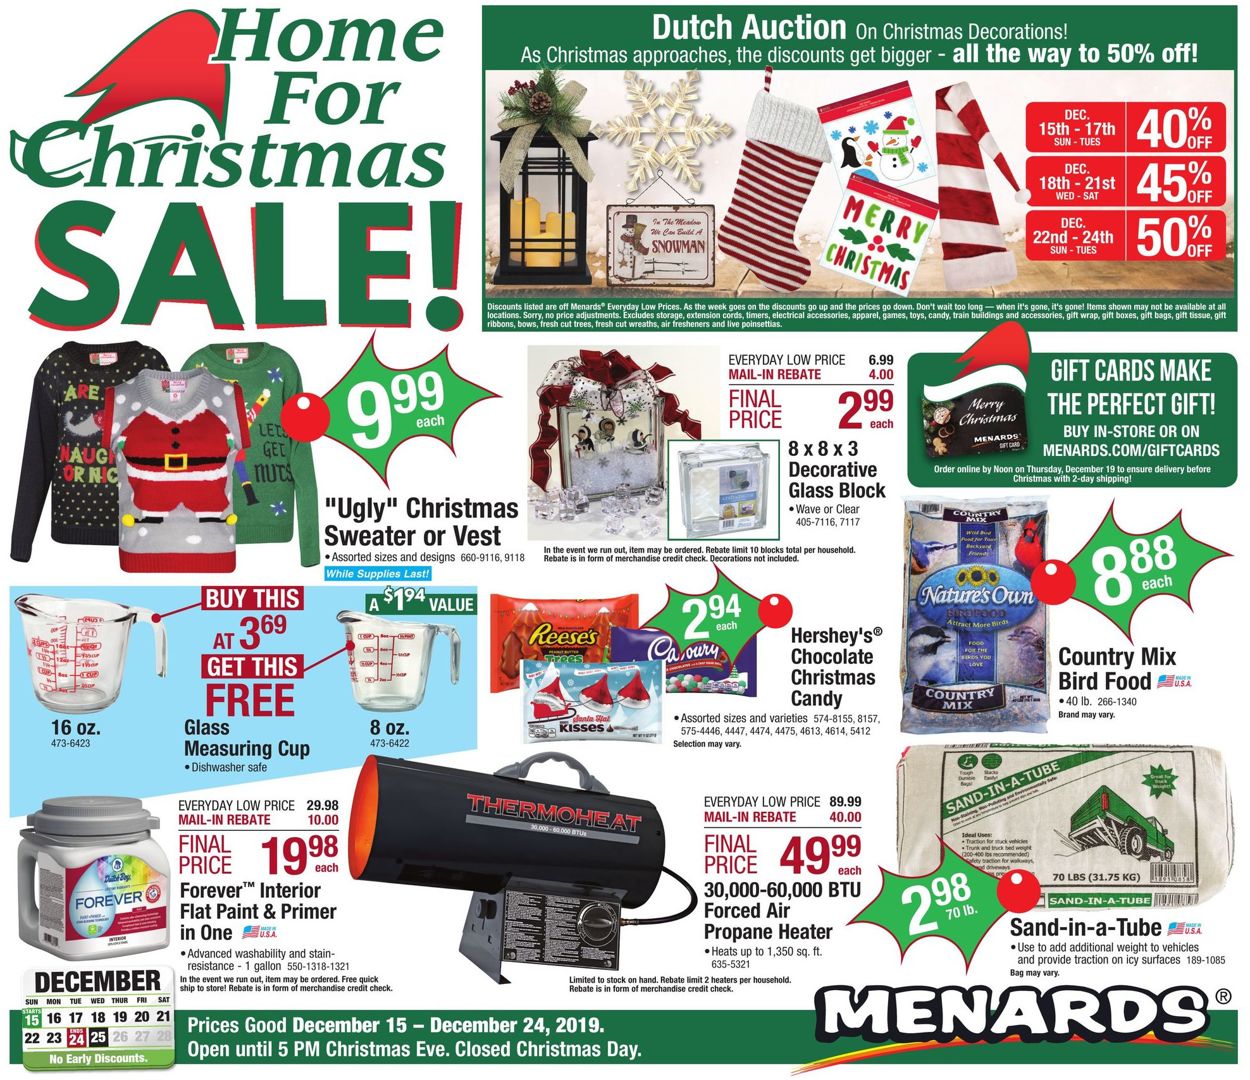 Menards - Christmas Sale Ad 2019 Current weekly ad 12/15 - 12/24/2019 [3] - 0